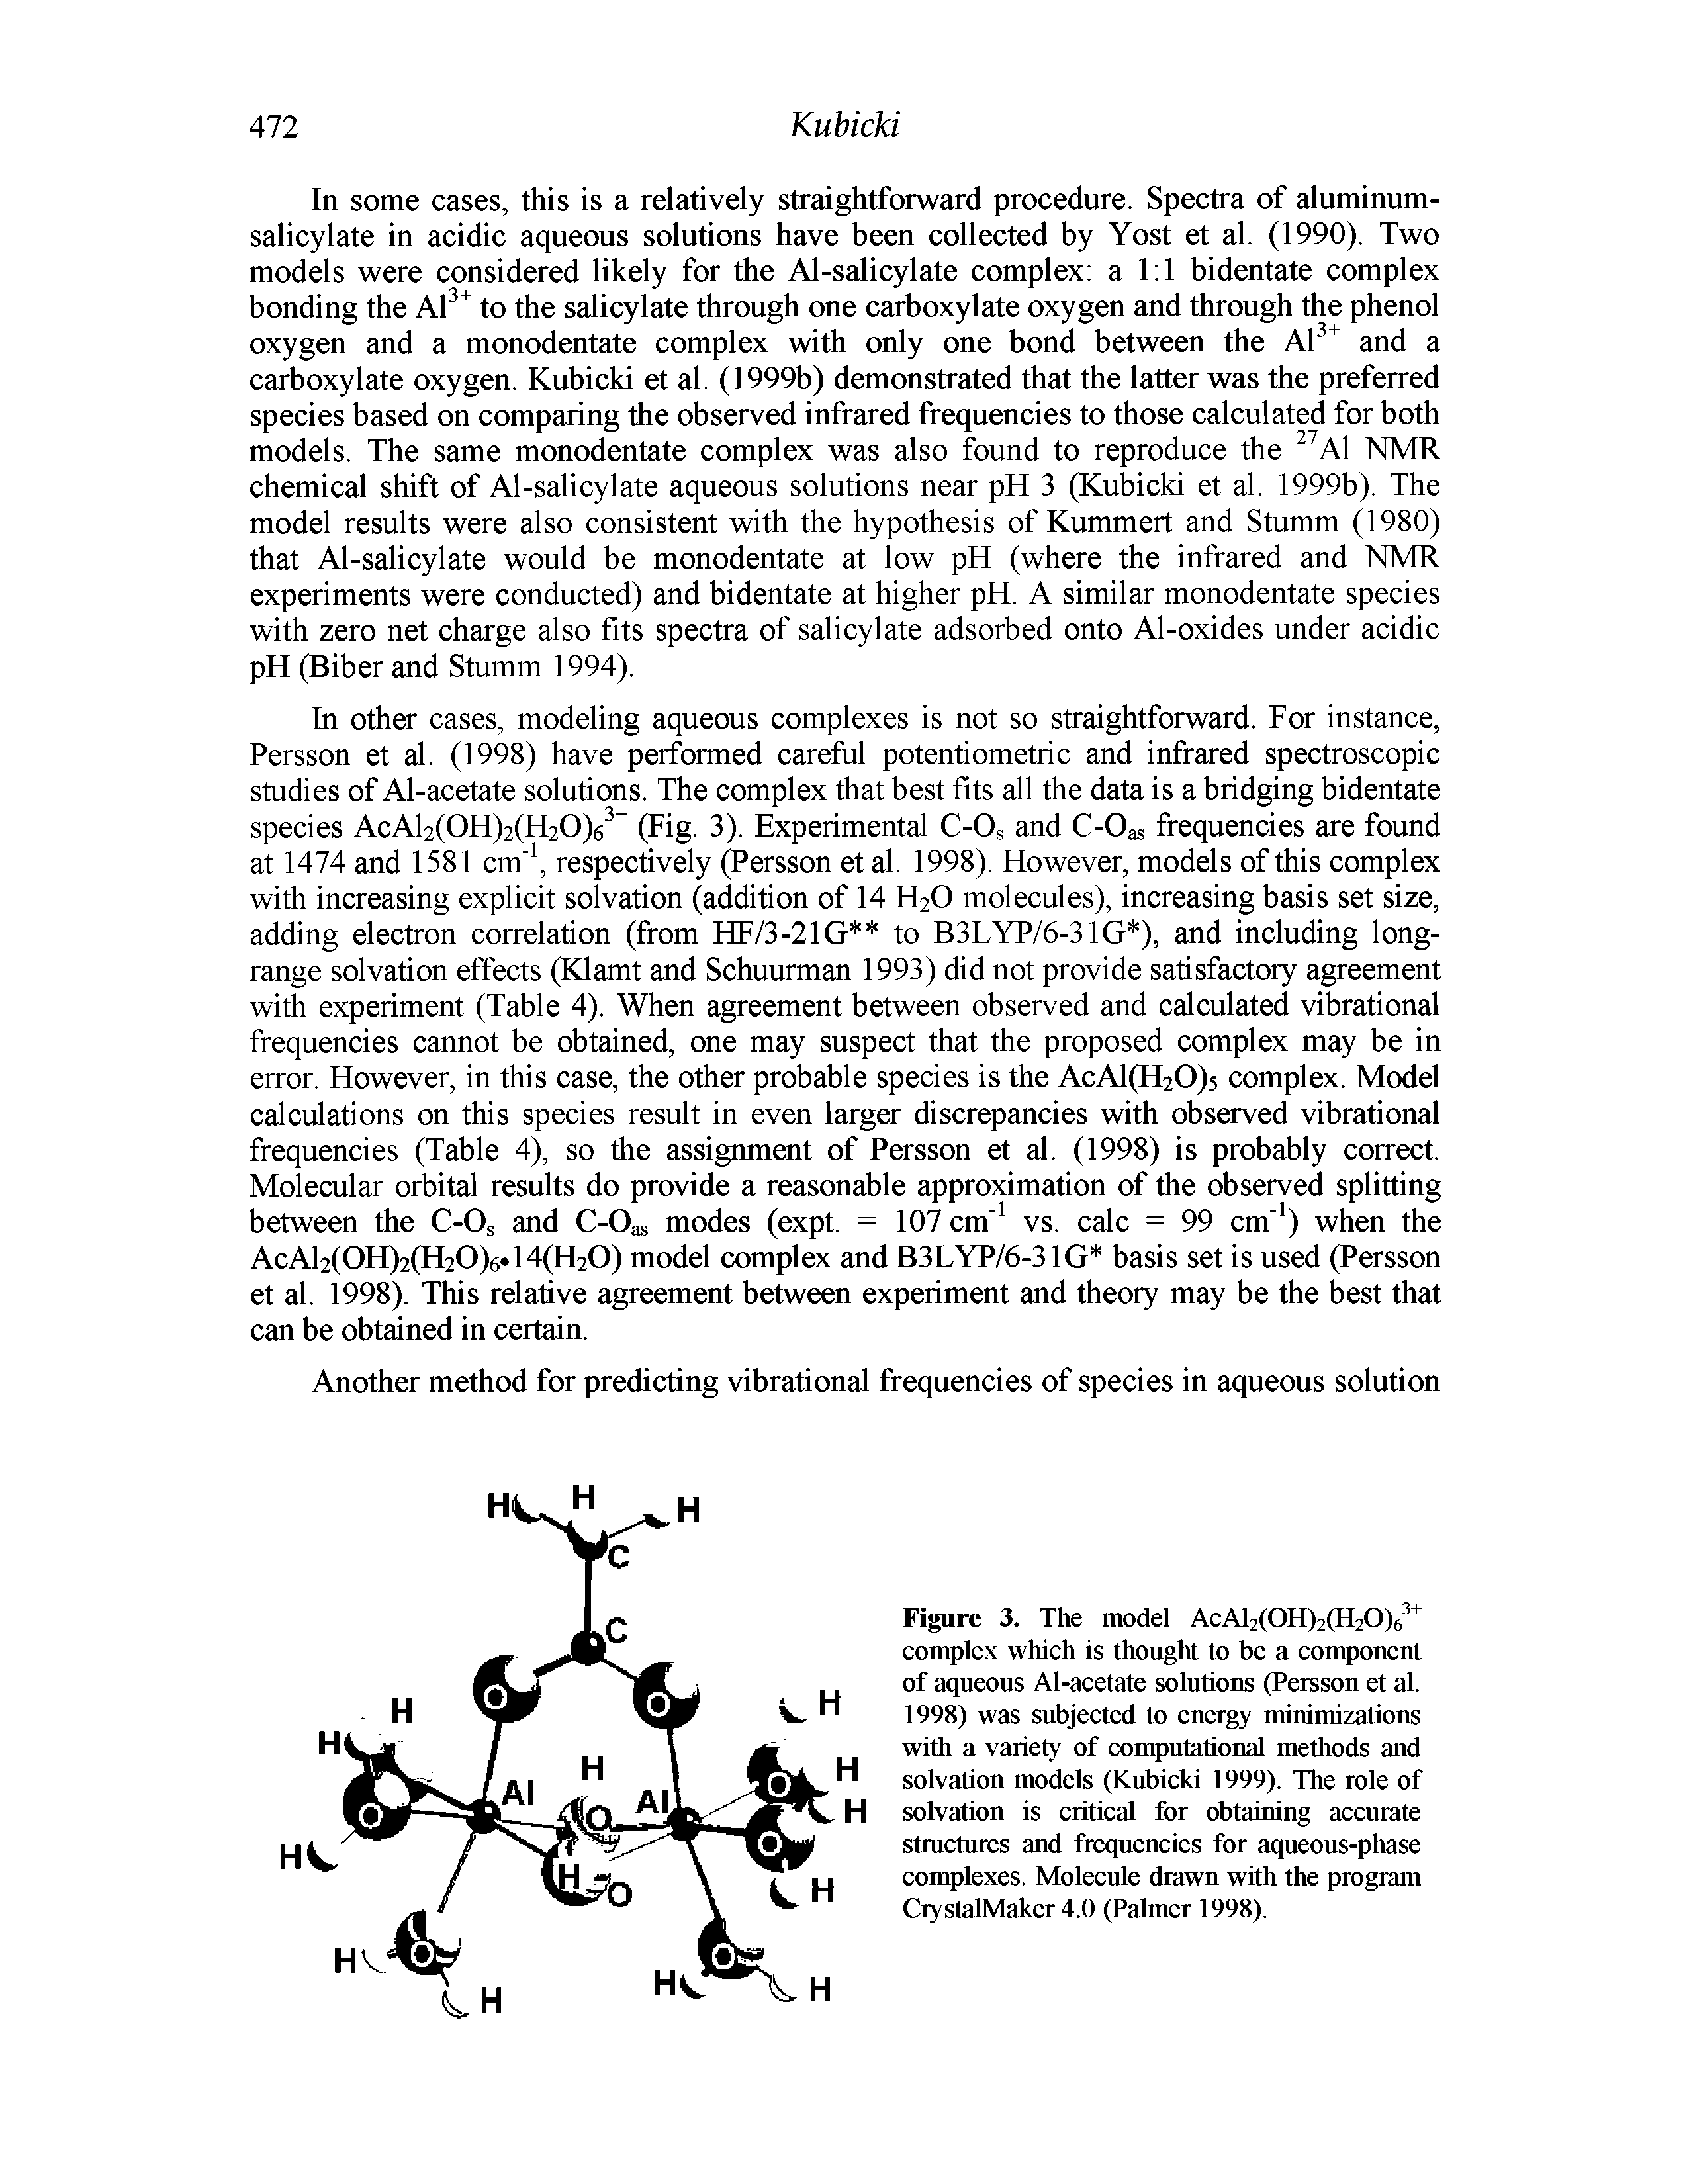 Figure 3. The model AcAl2(0H)2(H20)6 complex which is thought to be a component of aqueous Al-acetate solutions (Persson et al. 1998) was subjected to energy minimizations with a variety of computational methods and solvation models (Kubicki 1999). The role of solvation is critical for obtaining accurate stractures and frequencies for aqueous-phase complexes. Molecule drawn with the program CiystalMaker 4.0 (Palmer 1998).